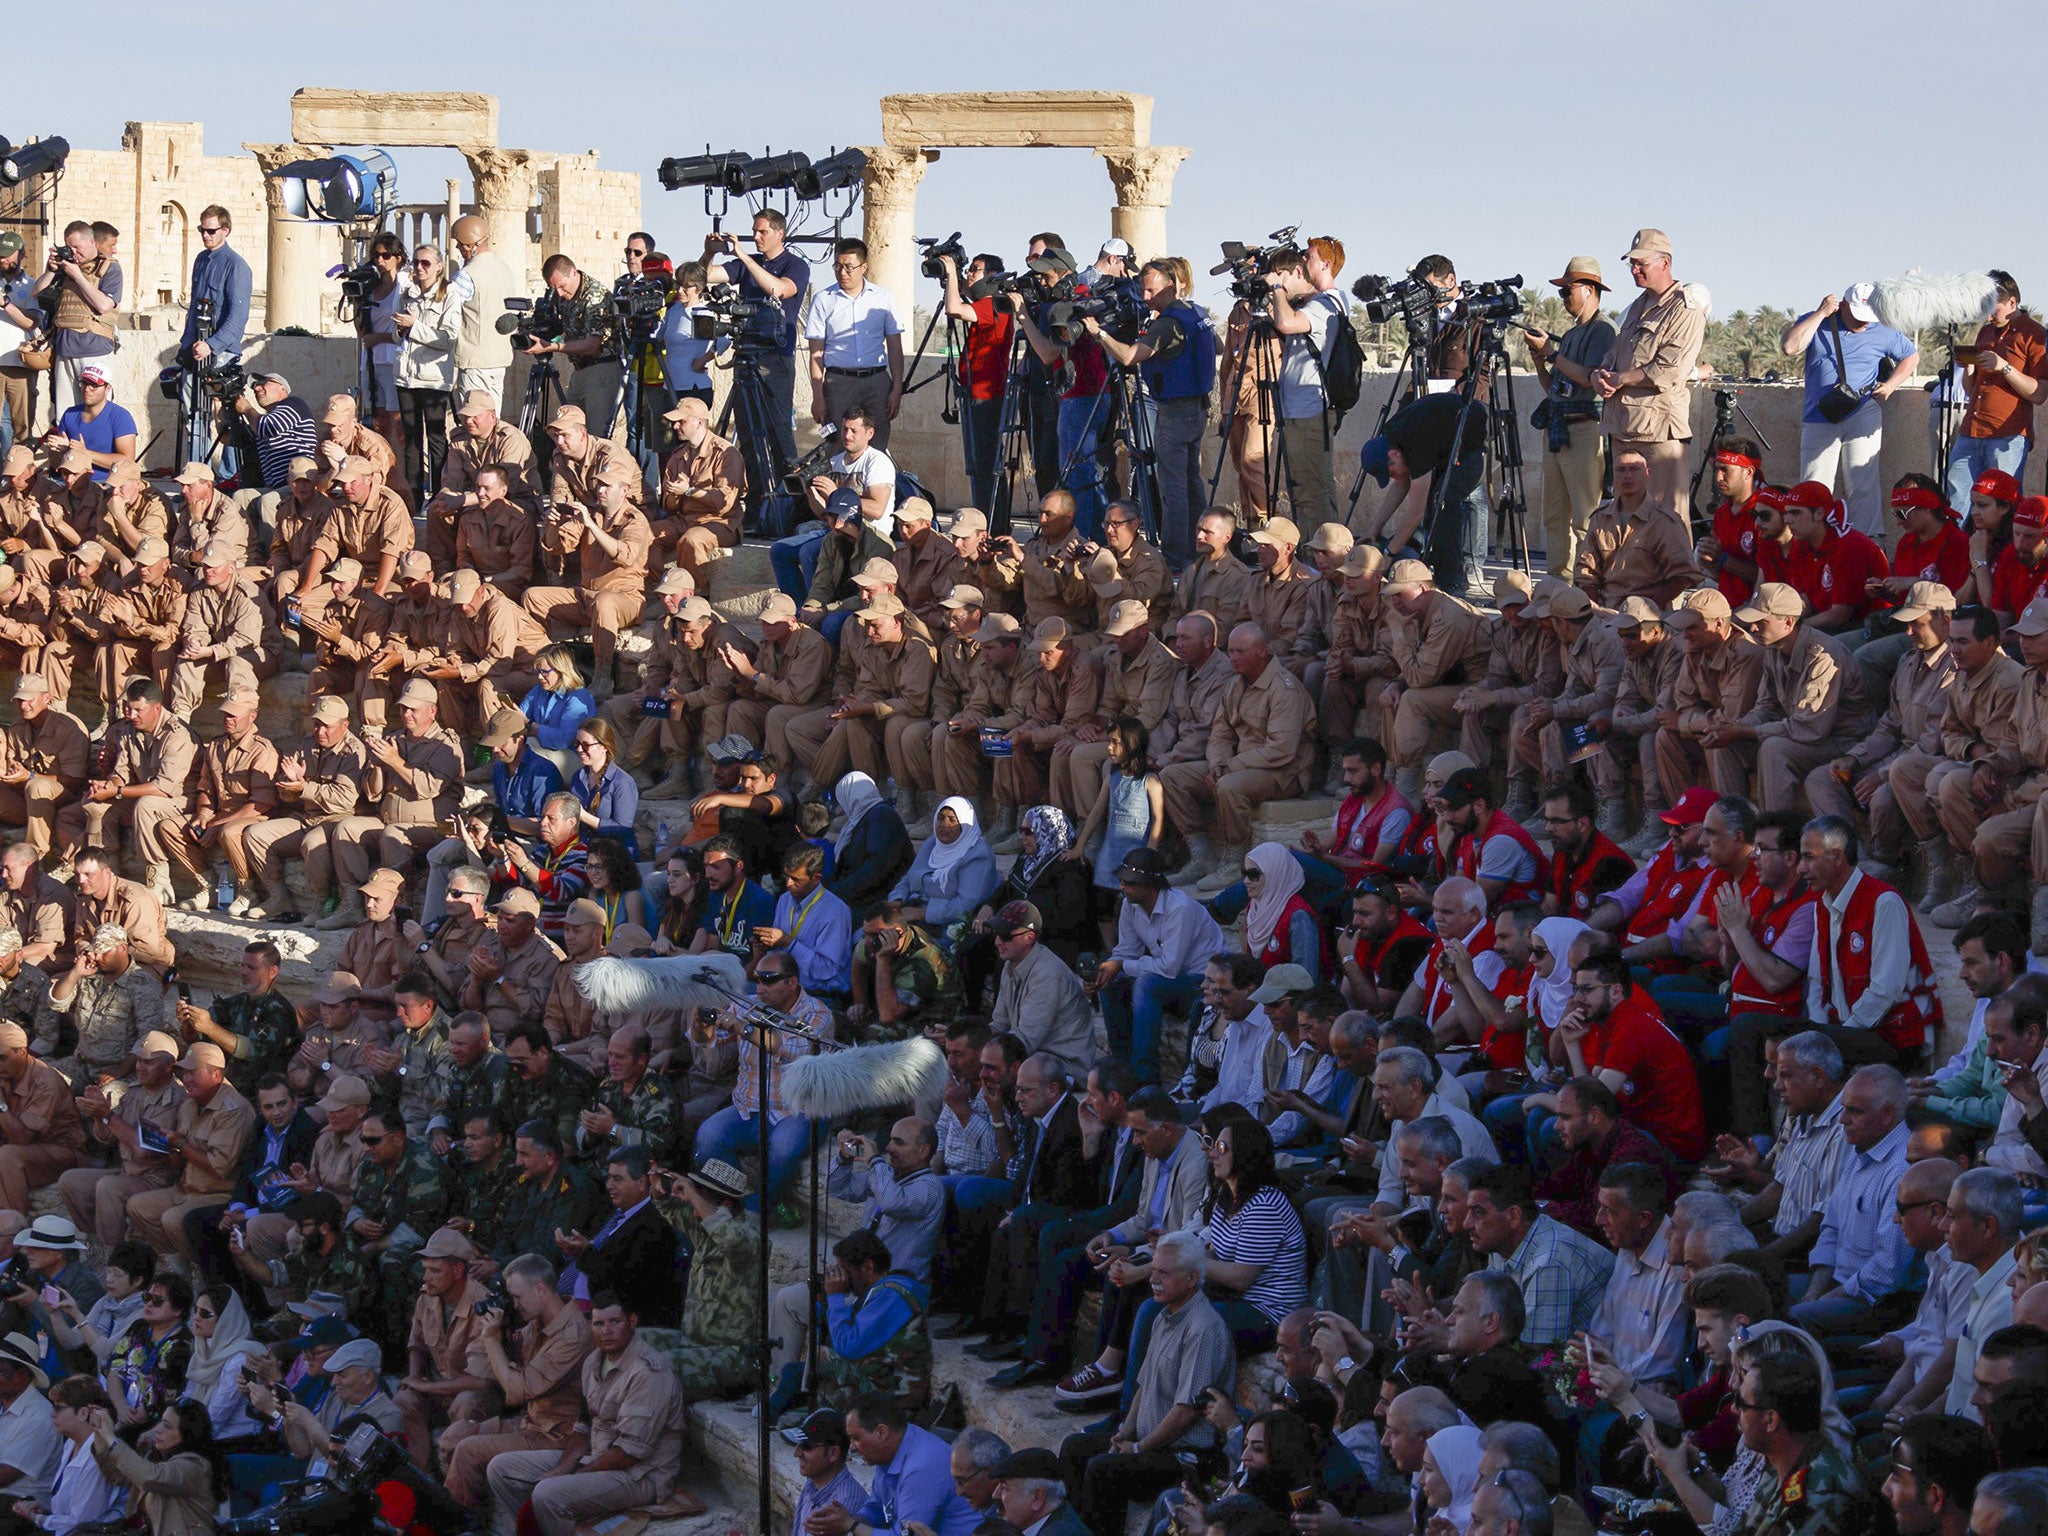 Russian soldiers and invited guests listen the Mariinsky Symphony Orchestra concert at Palmyra amphitheatre on 5 May 2016